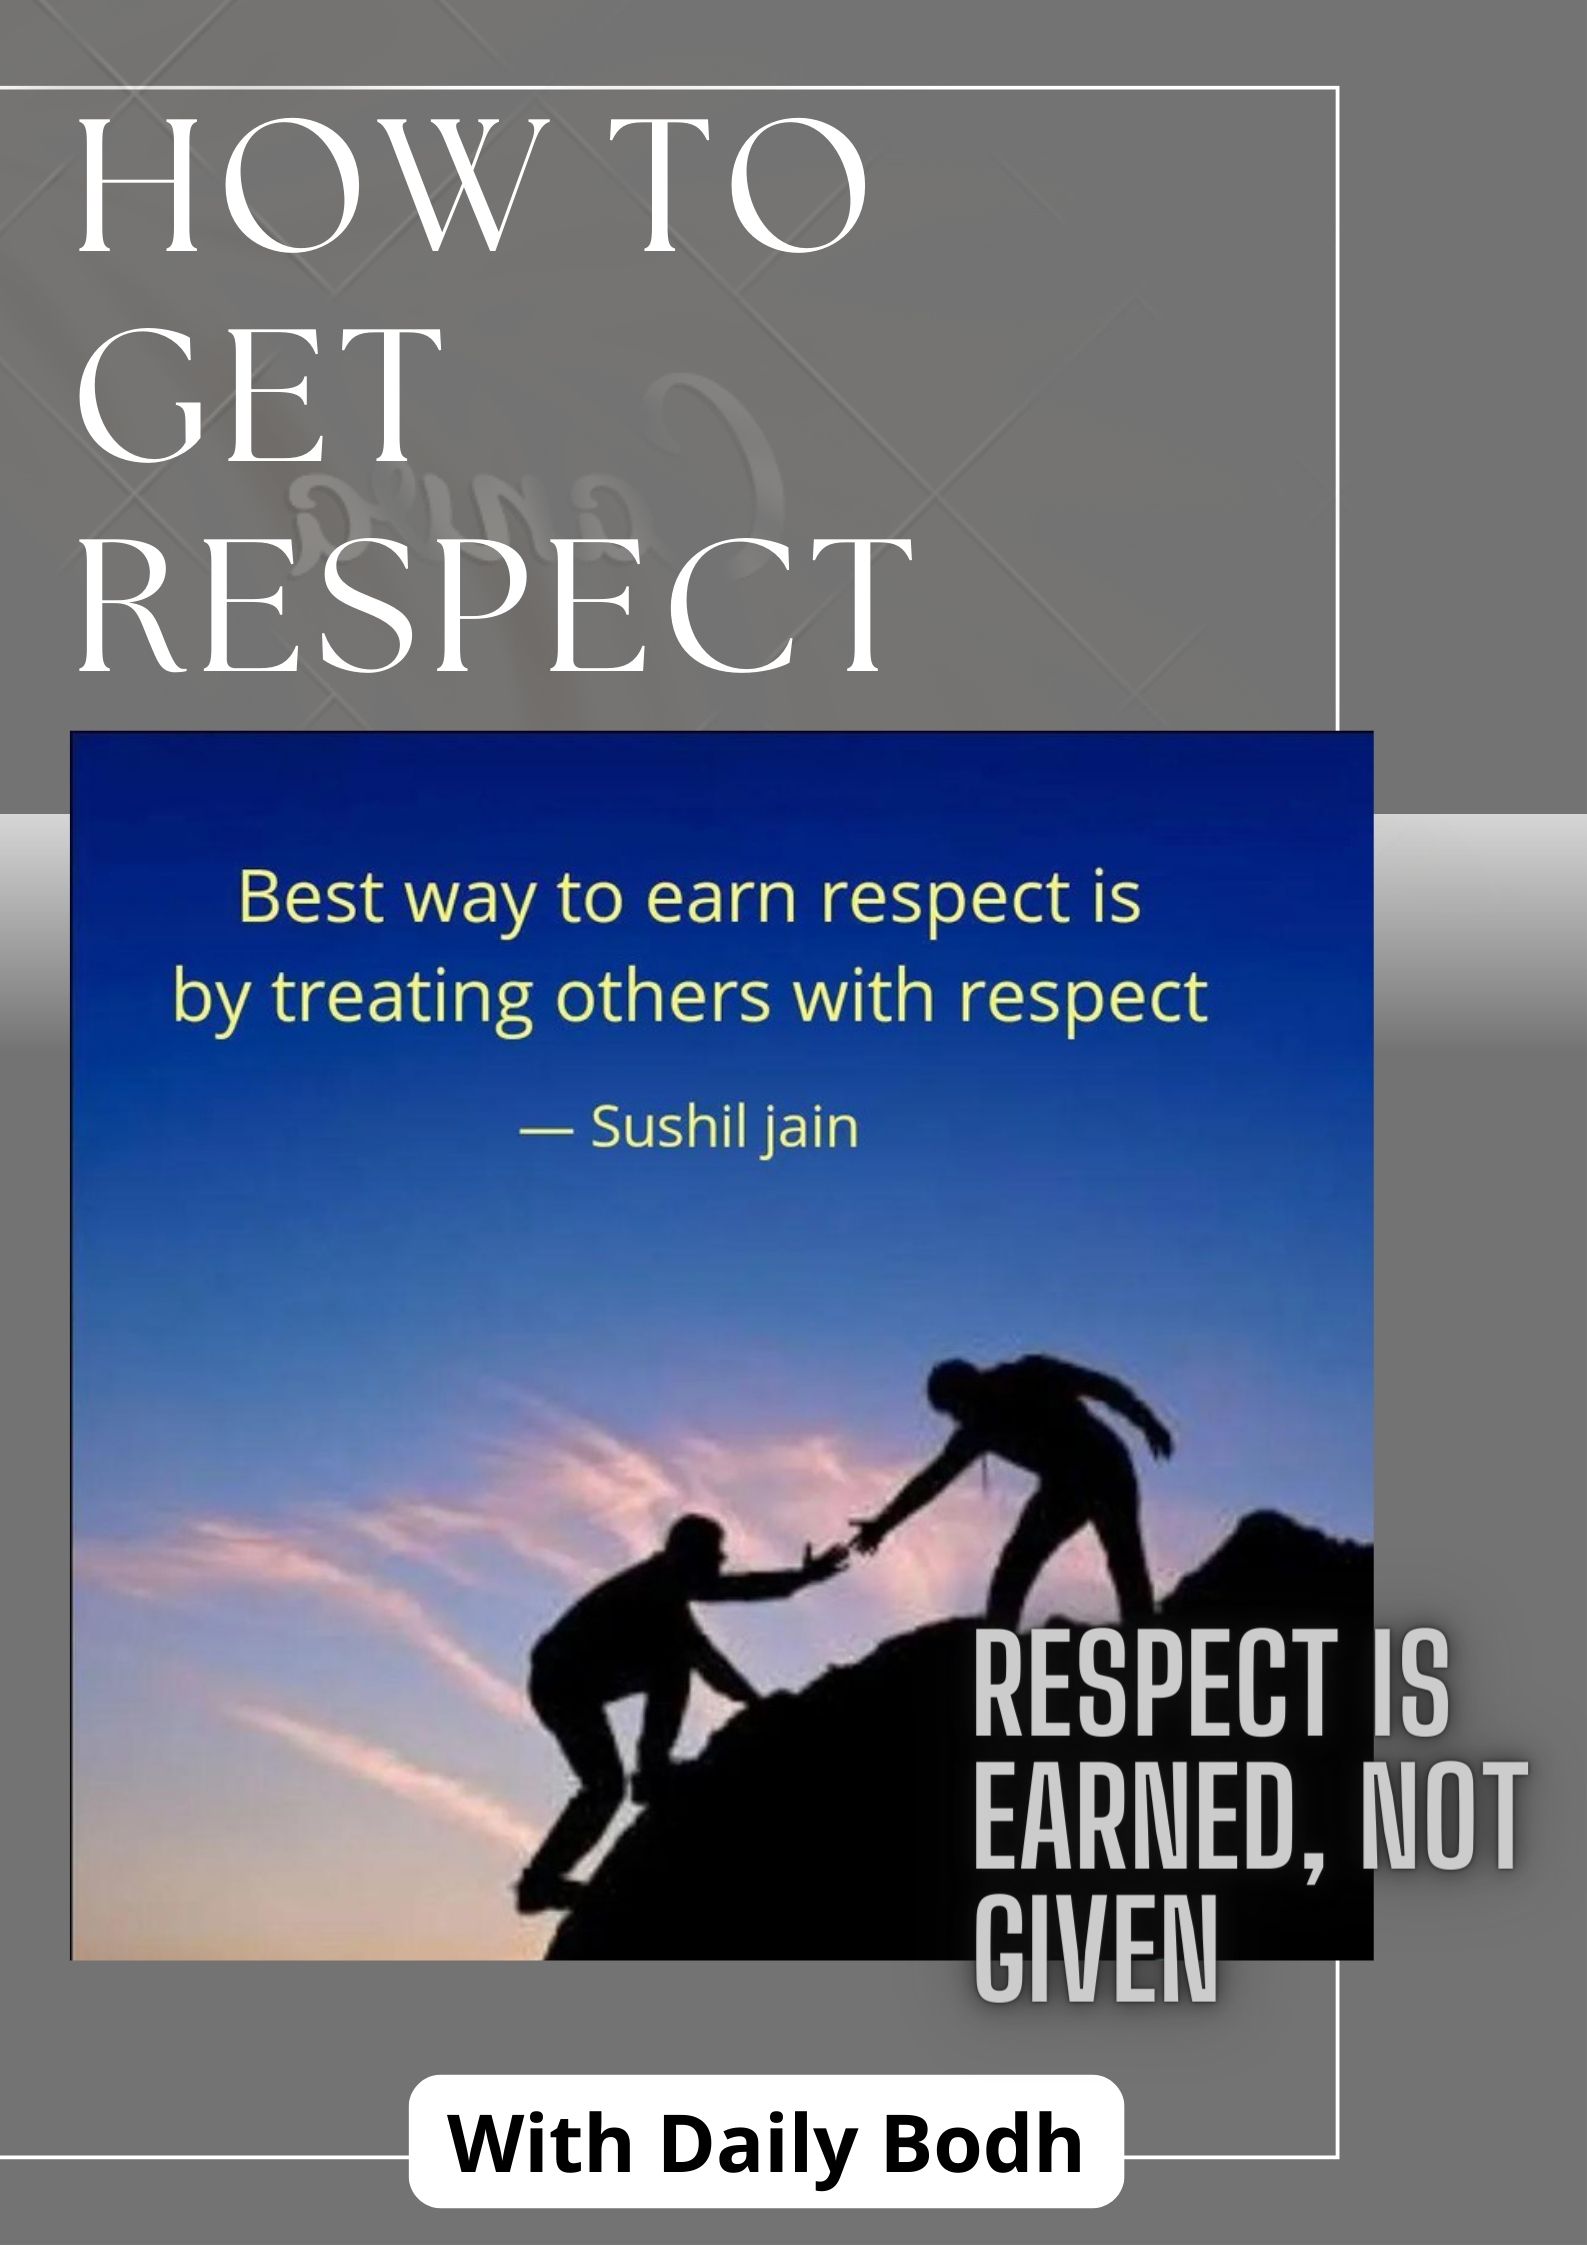 How to get respect